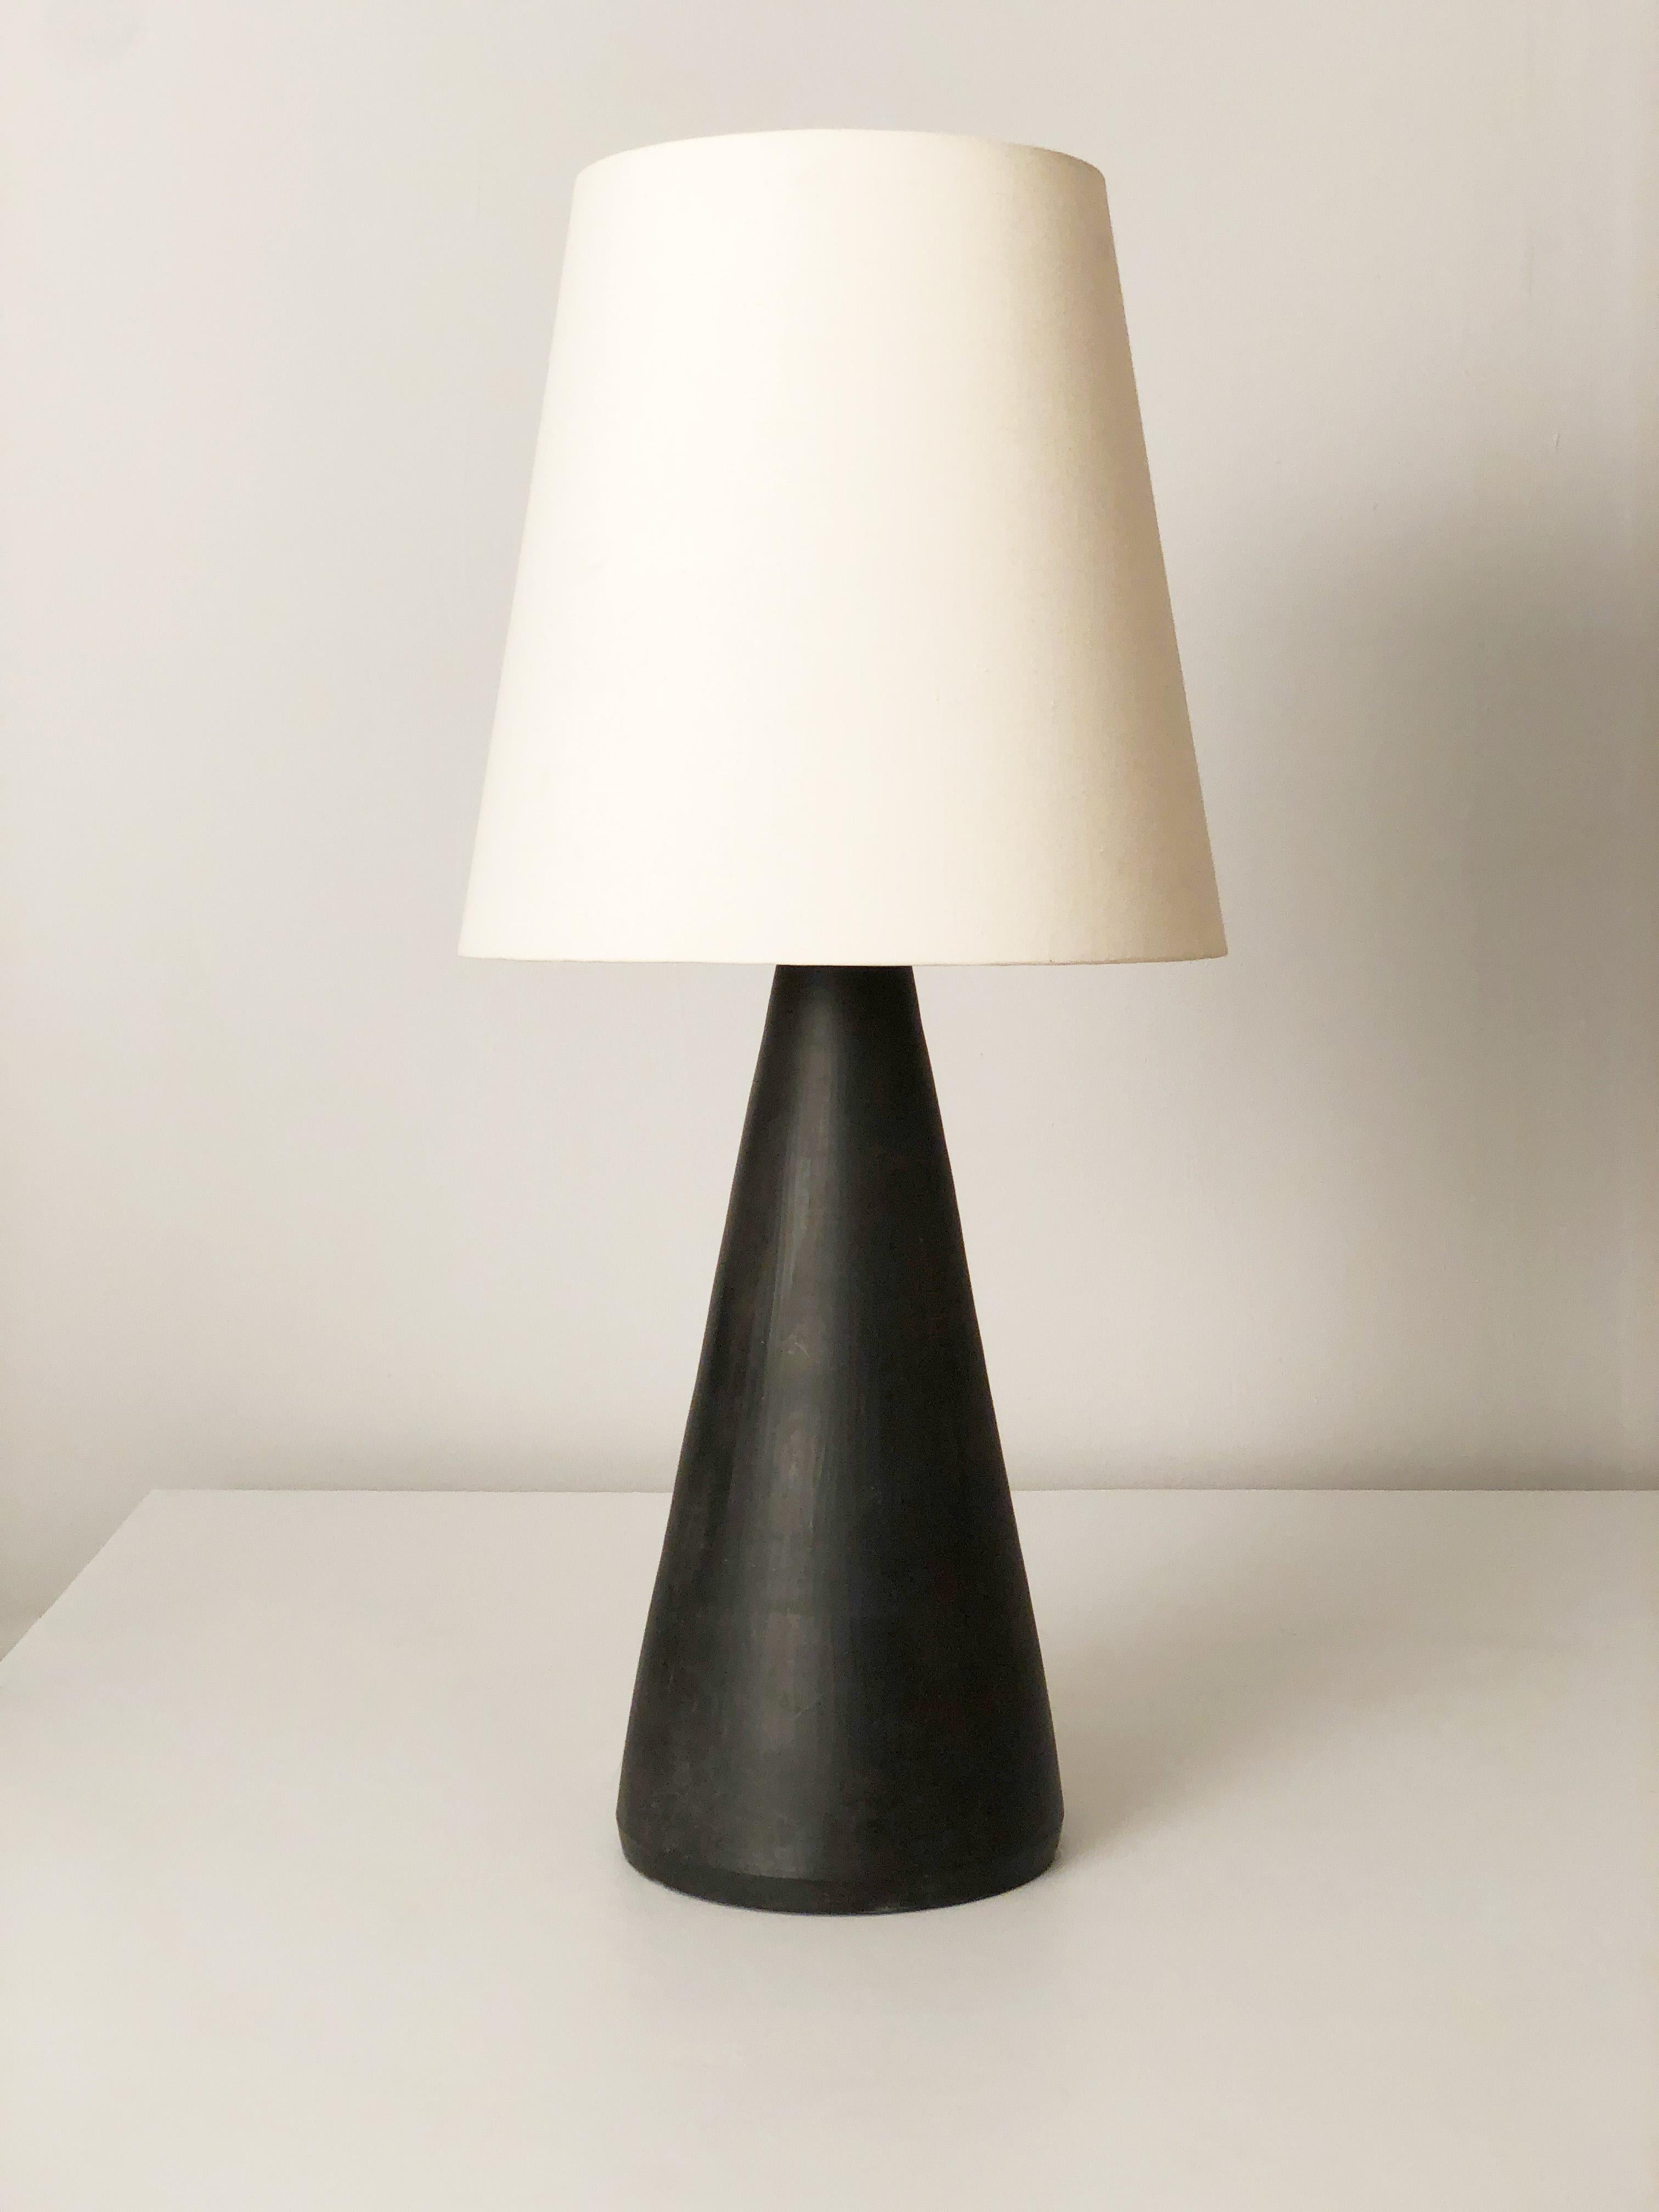 A tall black mat glaze mid-century ceramic table lamp by Danish ceramicist, glass workers and potter Axel Brüel (1900–1977). Later lamp shade in off-white cotton fabric over styrene backing. Axel Brüel was working as a ceramicist for Nymølle between